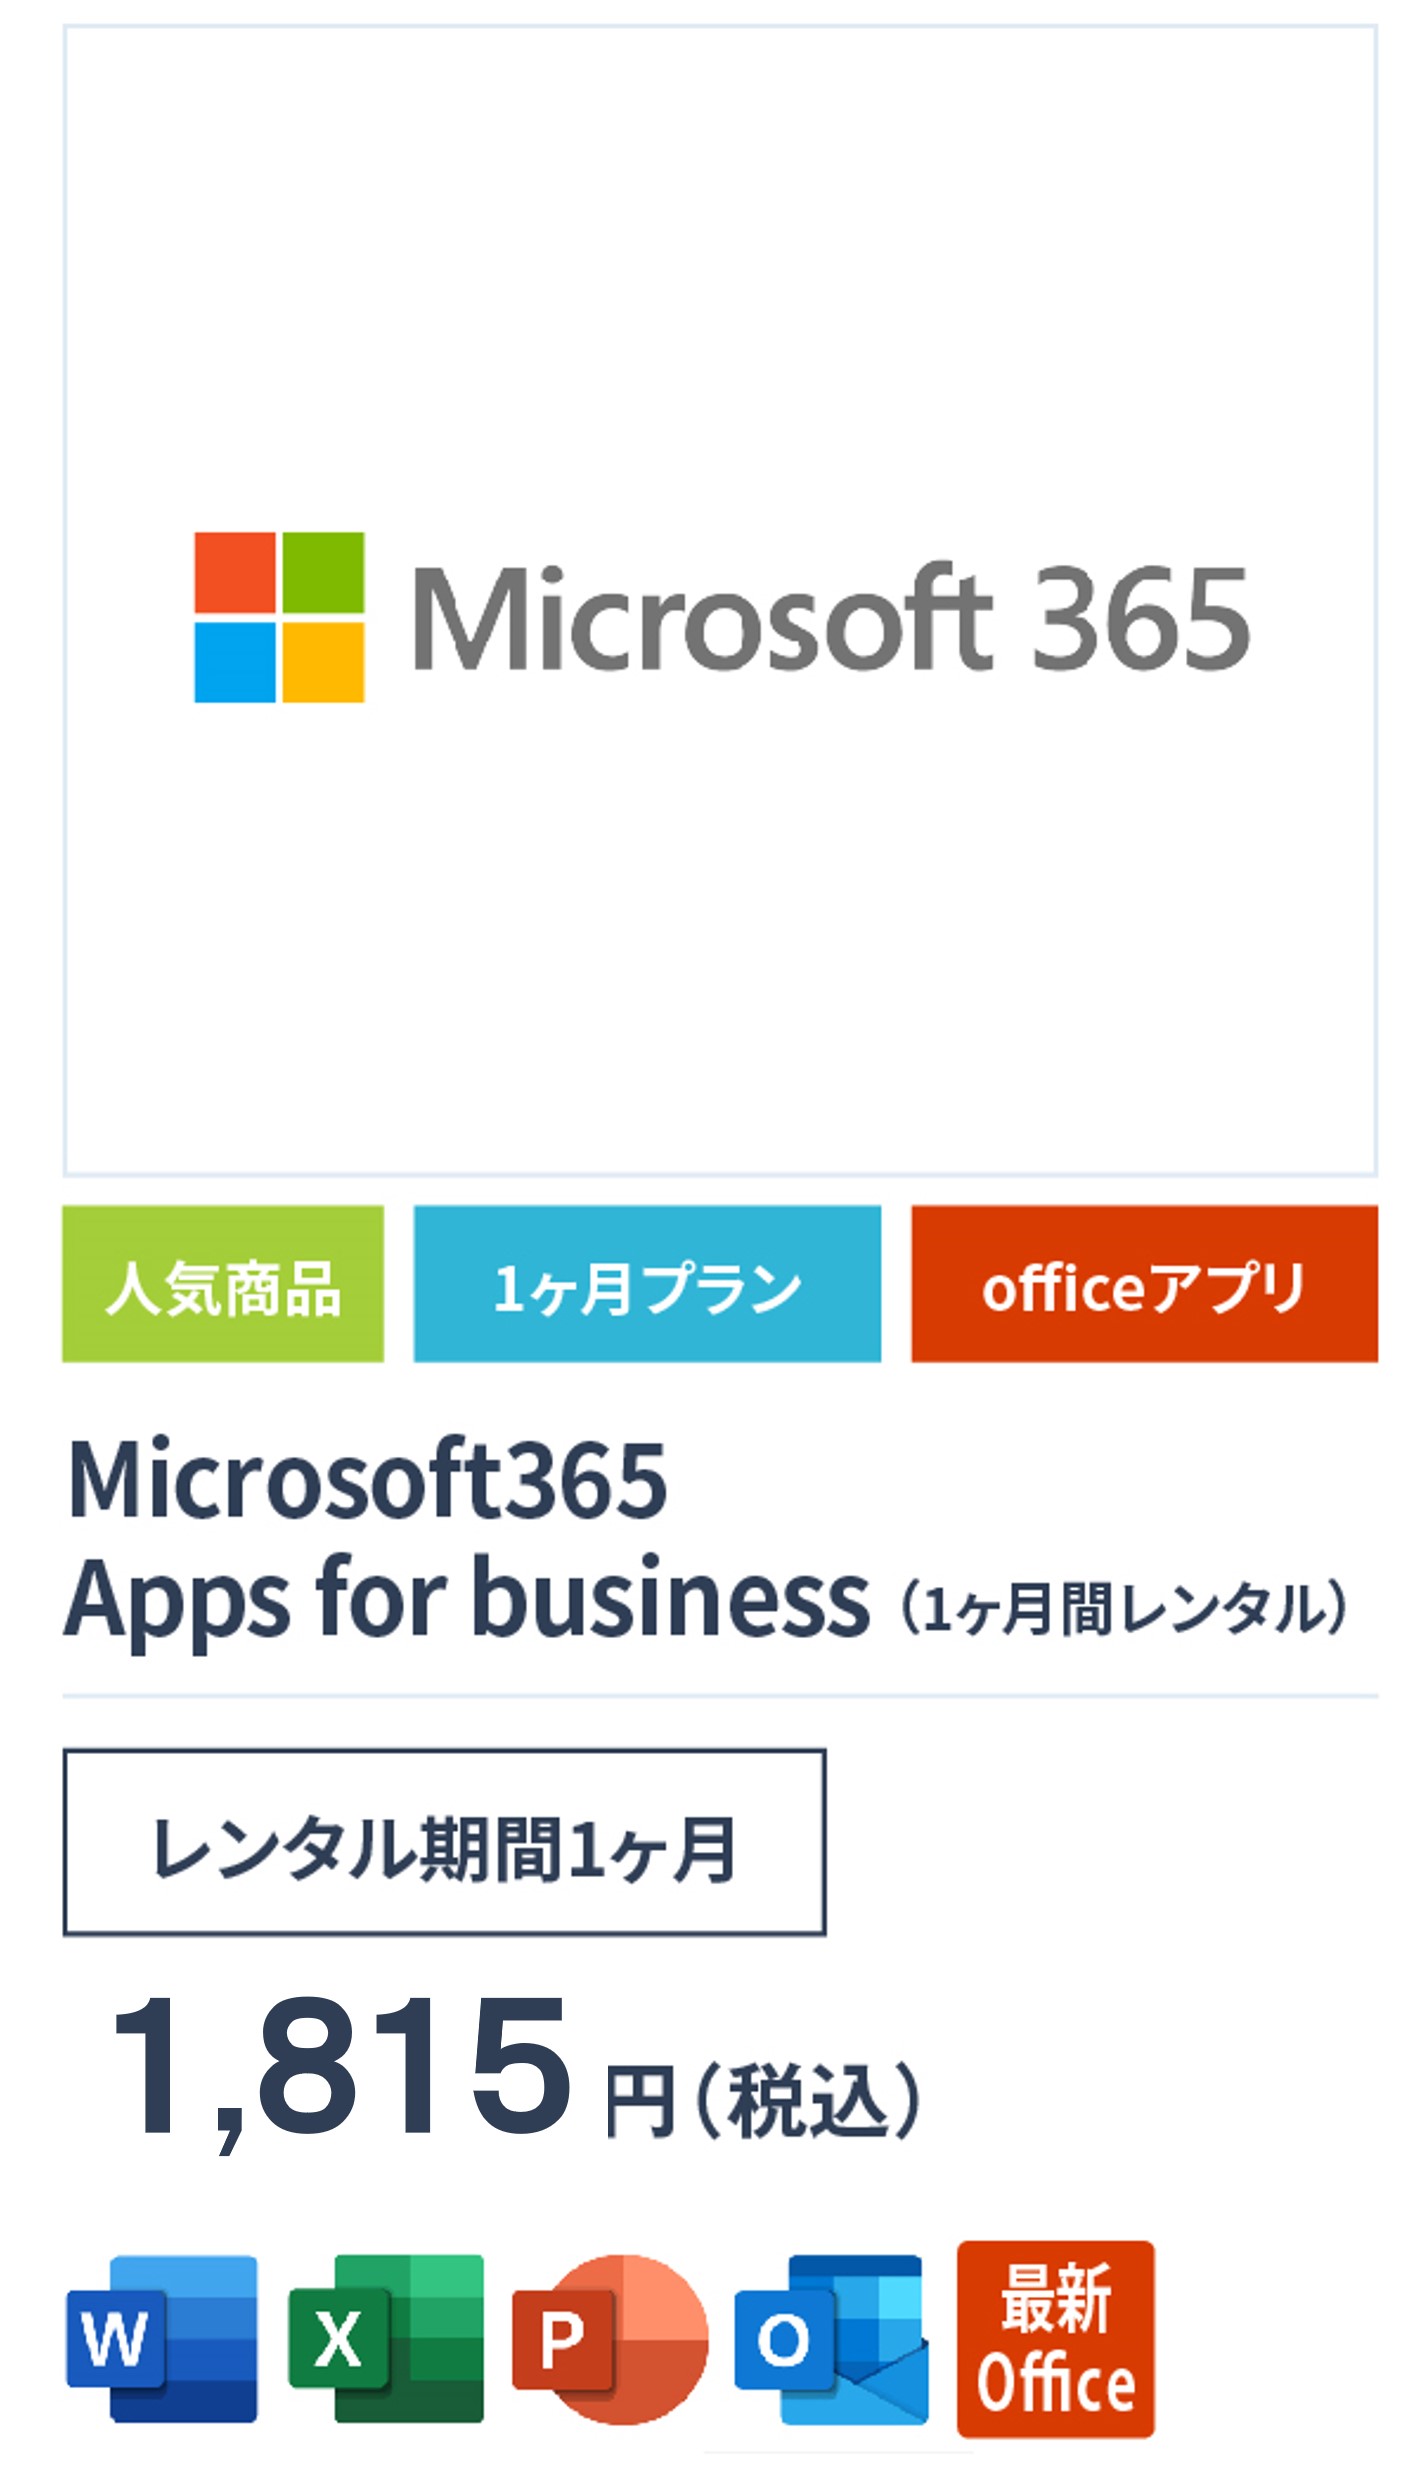 Microsoft365 Apps for business